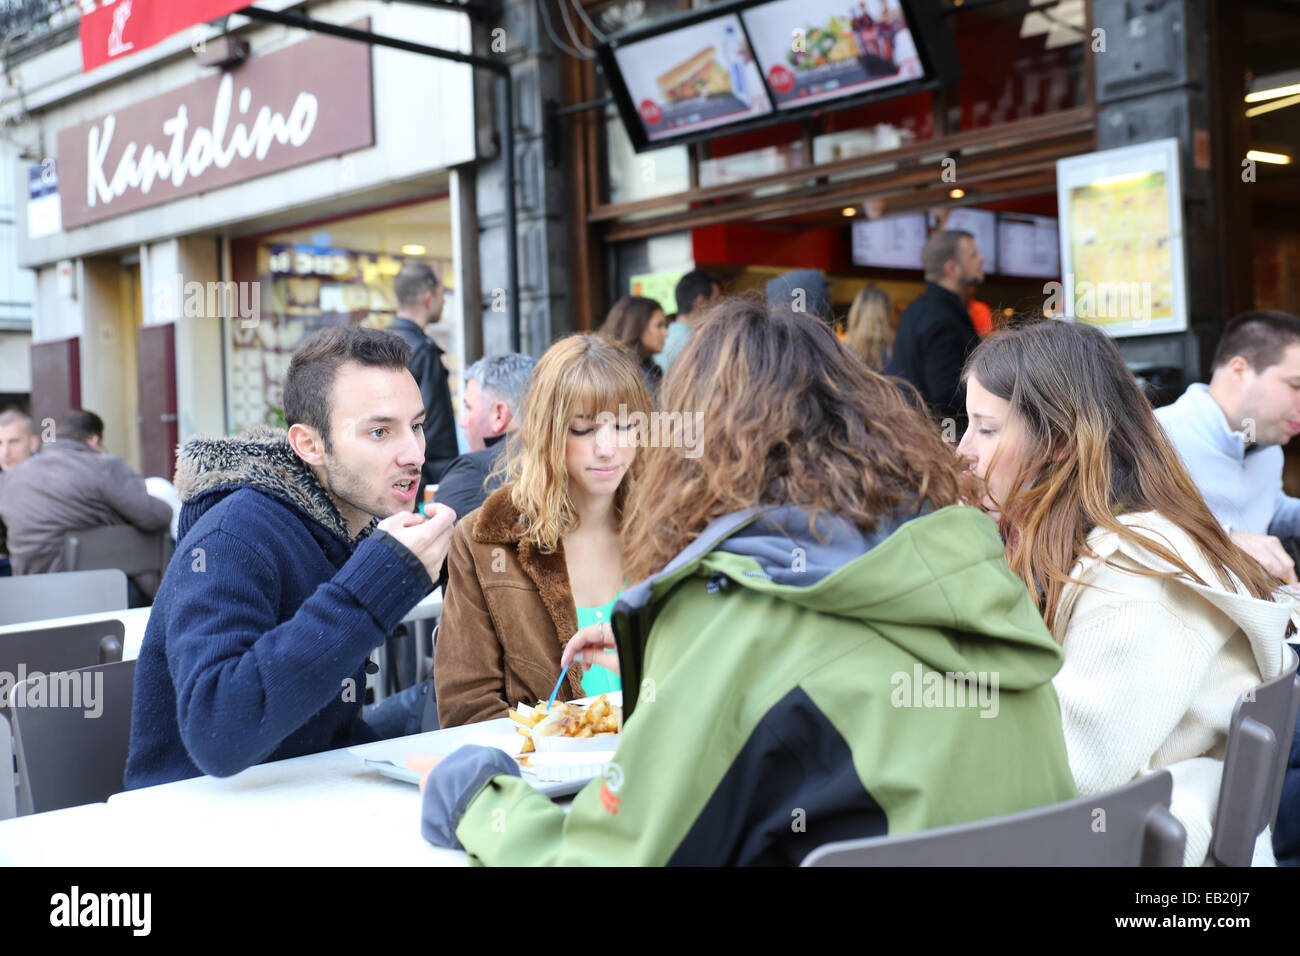 Les jeunes adolescent eating fast food outdoor Europe Banque D'Images